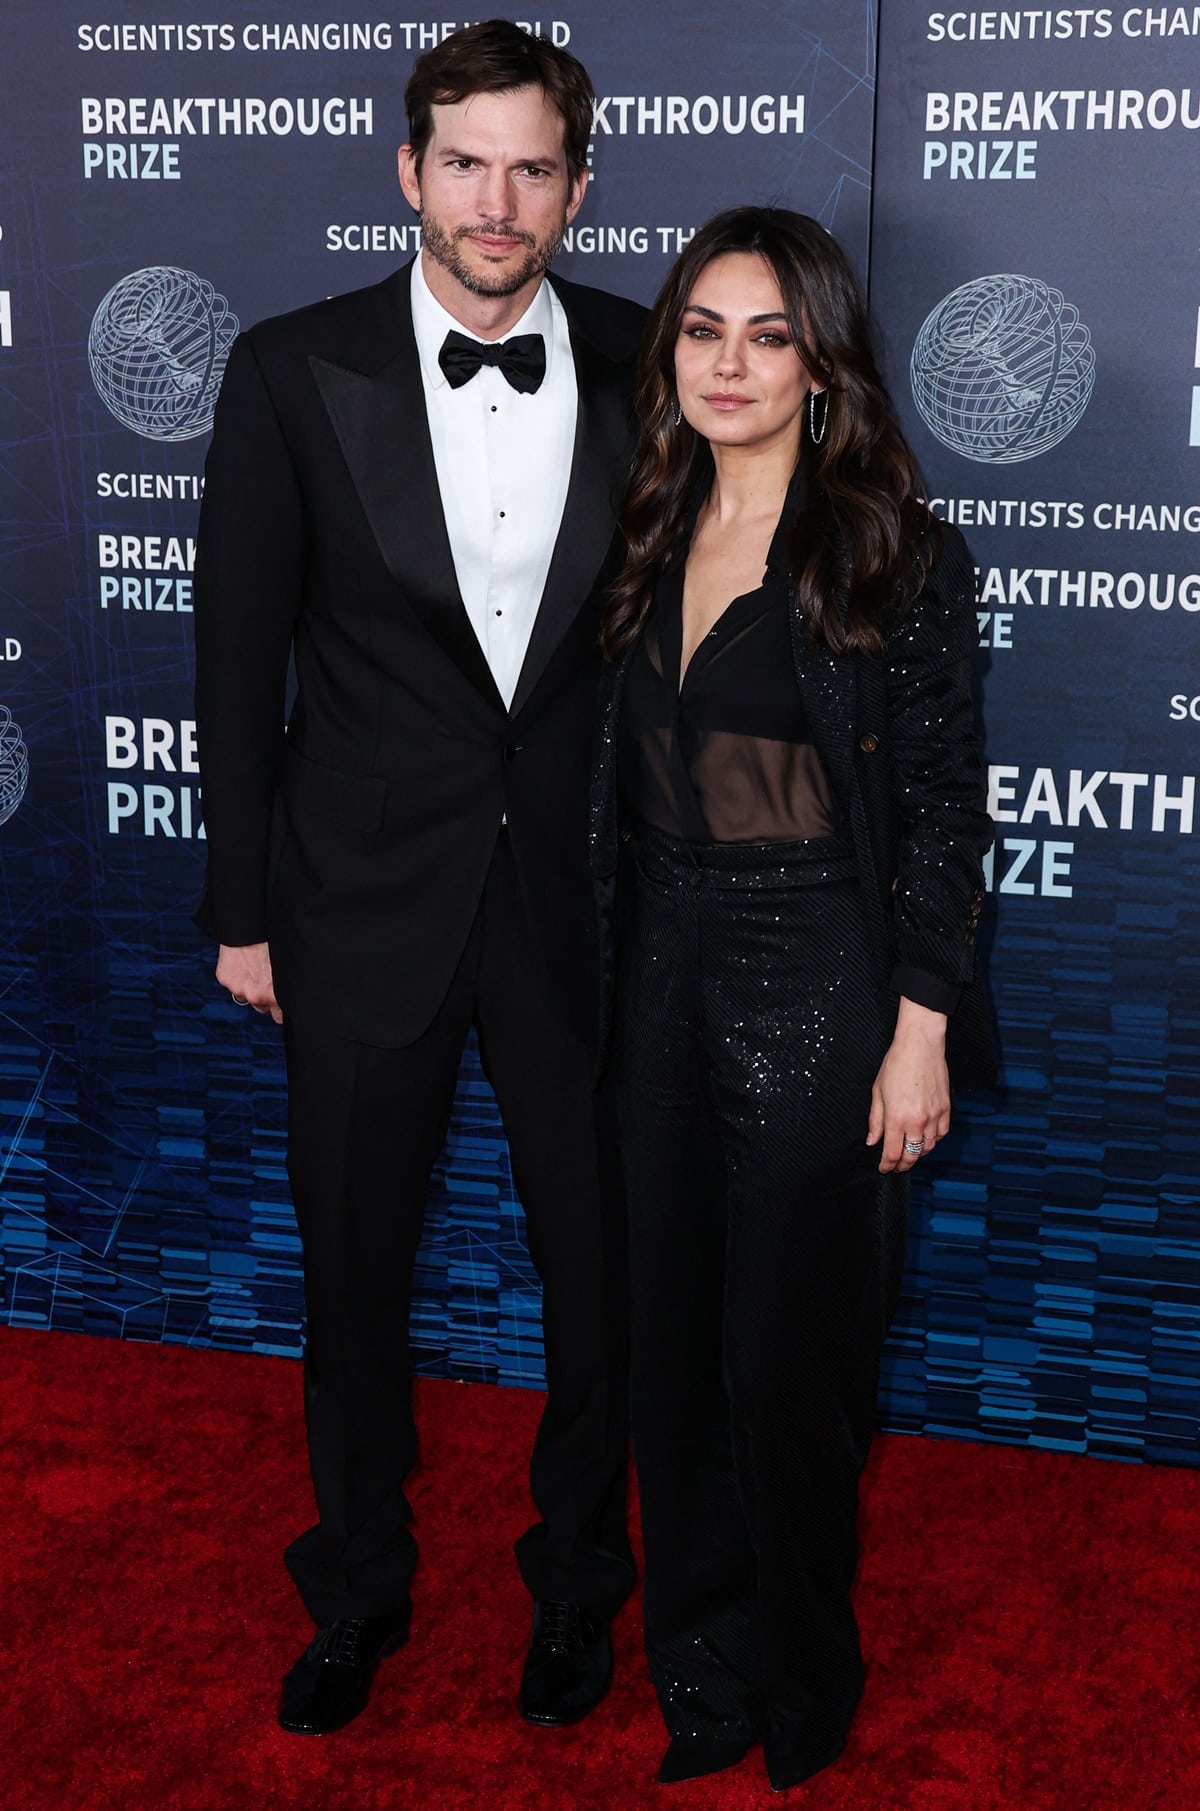 shton Kutcher wore a tuxedo while Mila Kunis donned a sparkling Brunello Cucinelli black suit and a sheer blouse at the 9th Annual Breakthrough Prize Ceremony